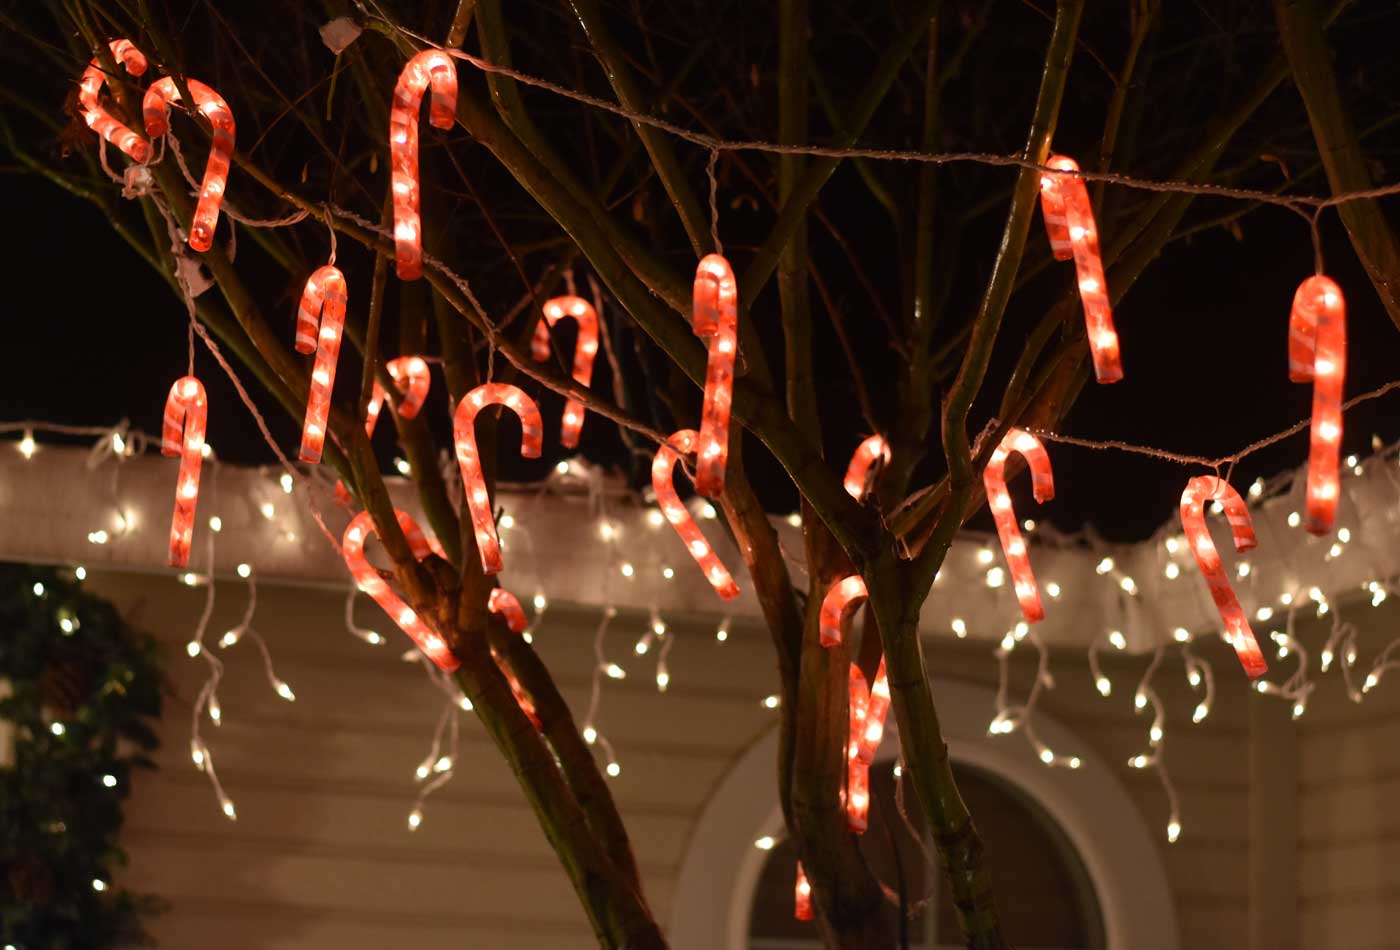 shows an image of candy canes on a tree - christmas party theme ideas